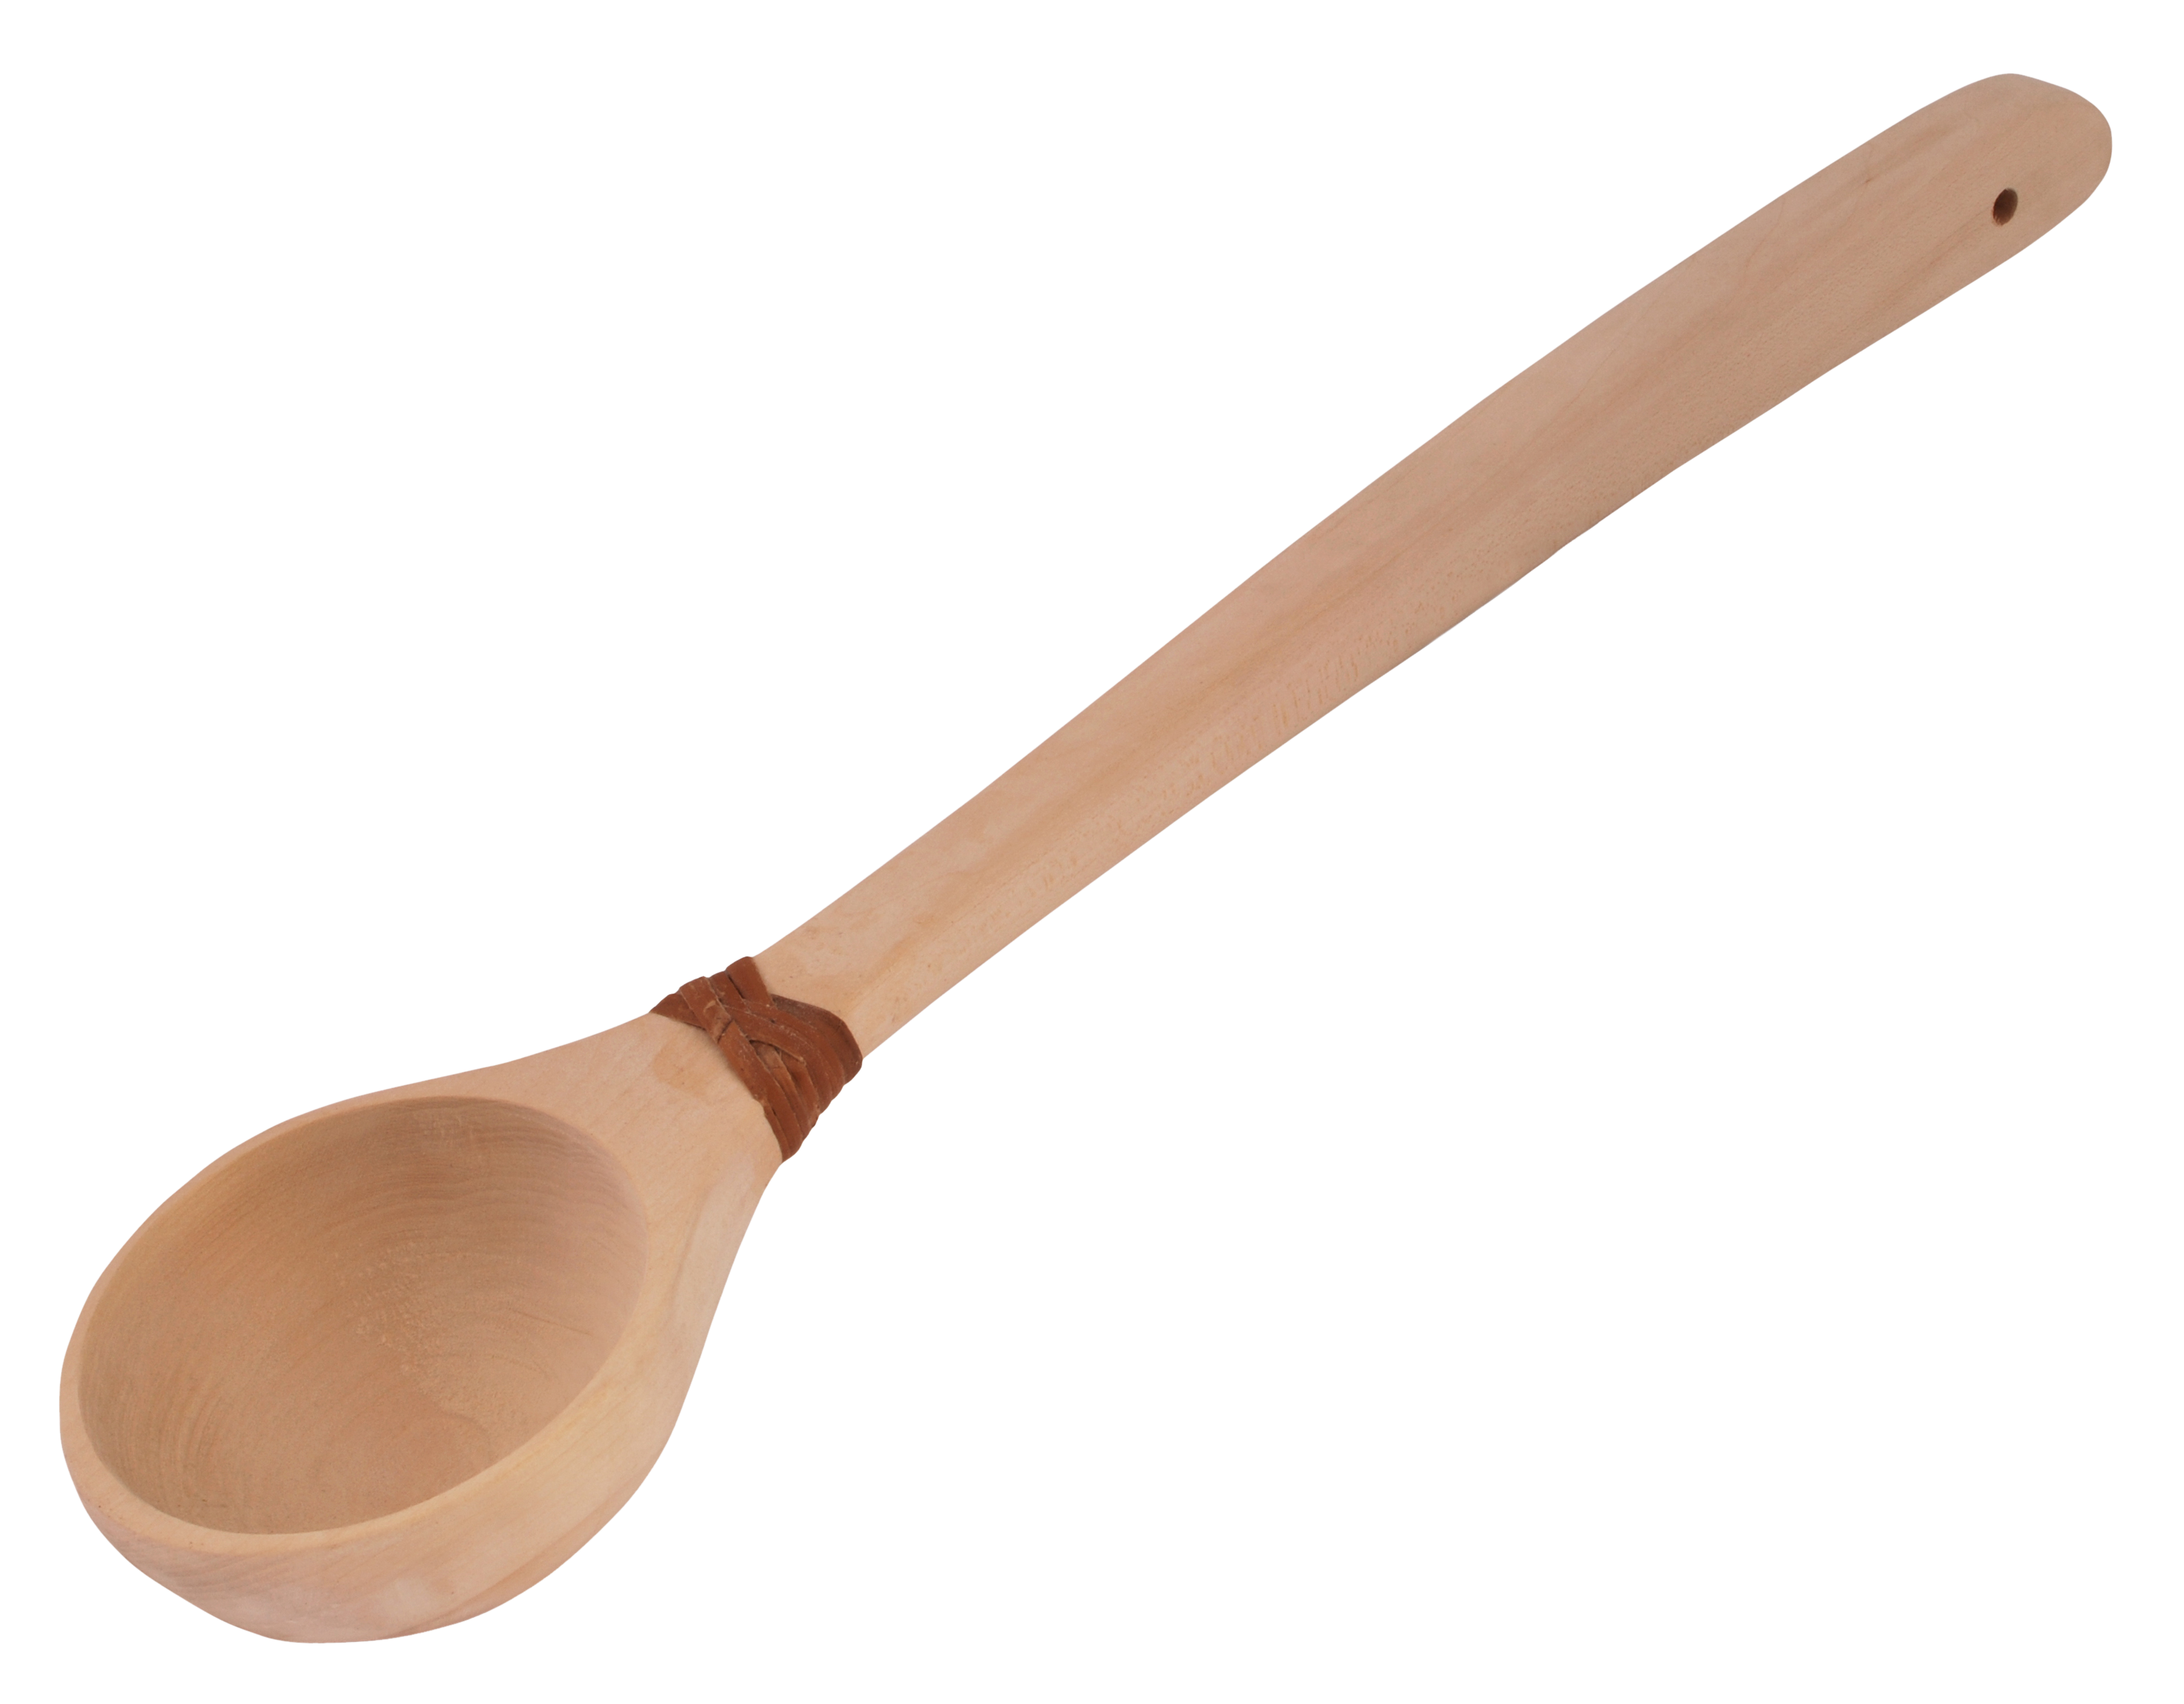 Wooden Spoon File PNG Image